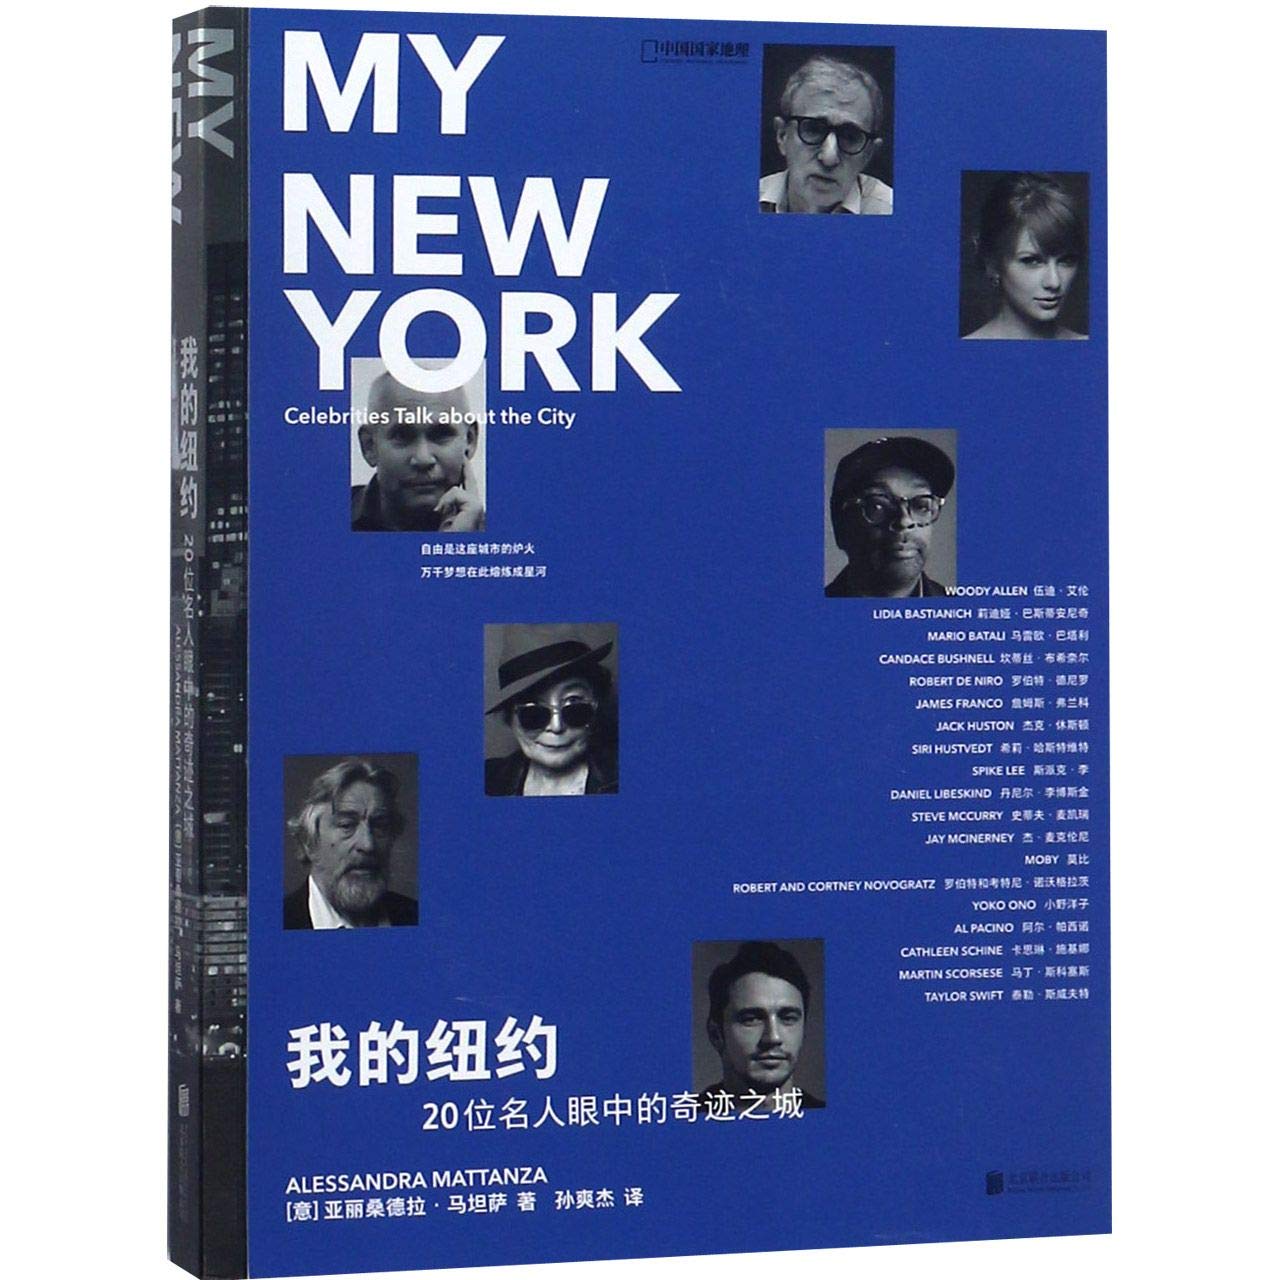 Alessandra Mattanza | BUY FROM AMAZON Chinese Edition - My New York: Celebrities Talk About the City